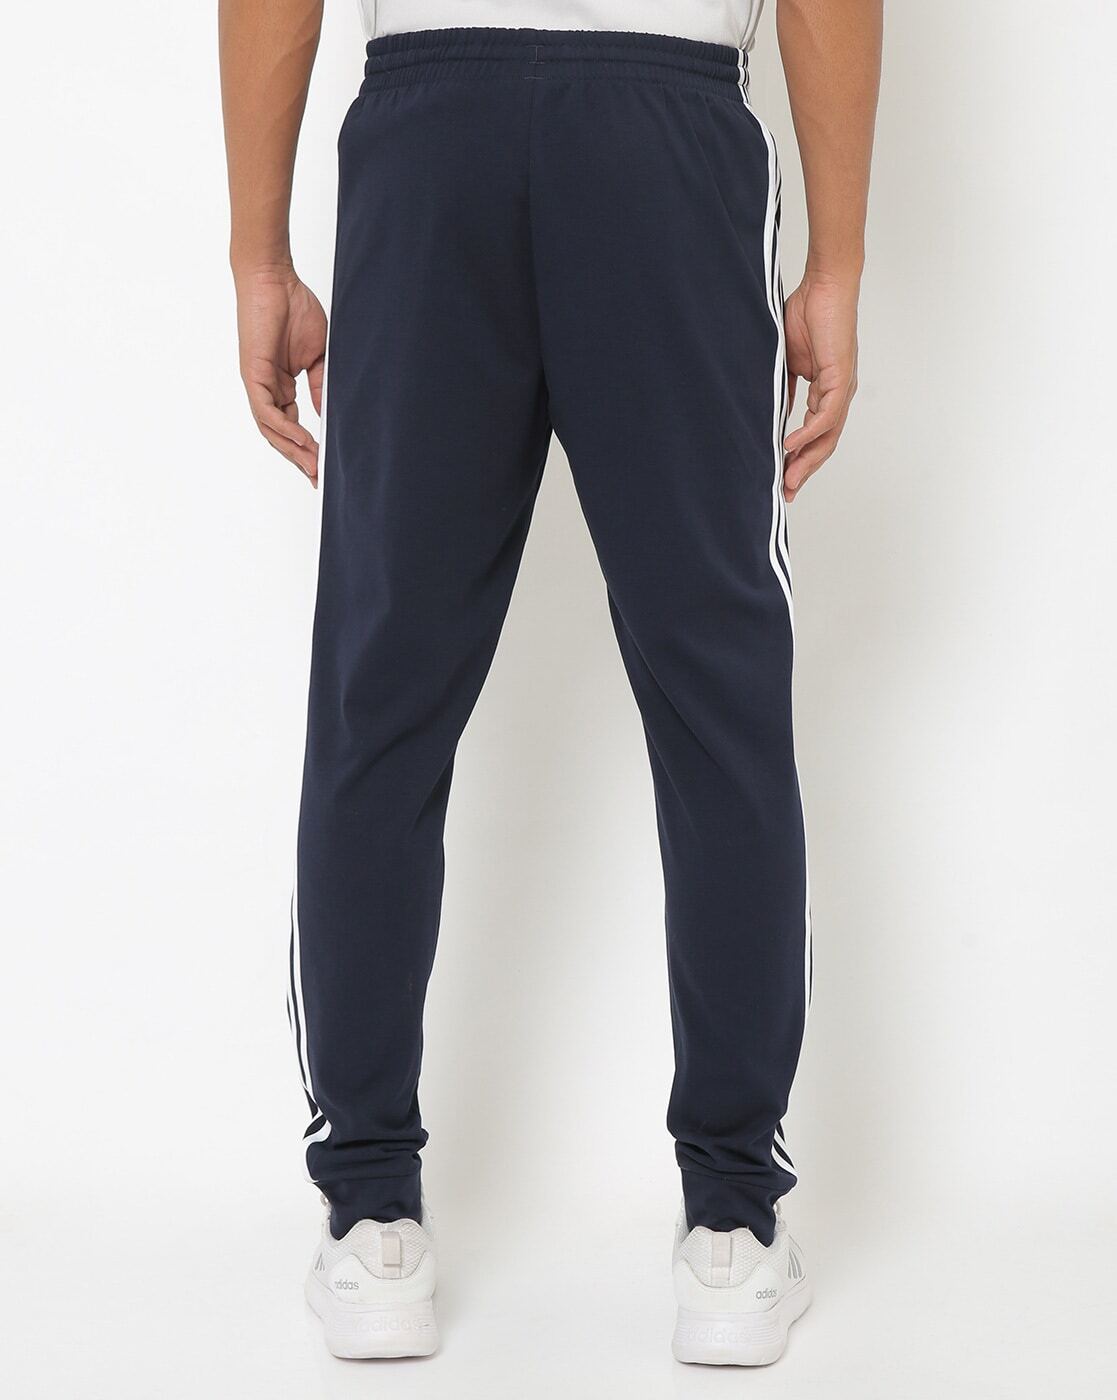 Track Pants with Contrast Stripes-Hb0945